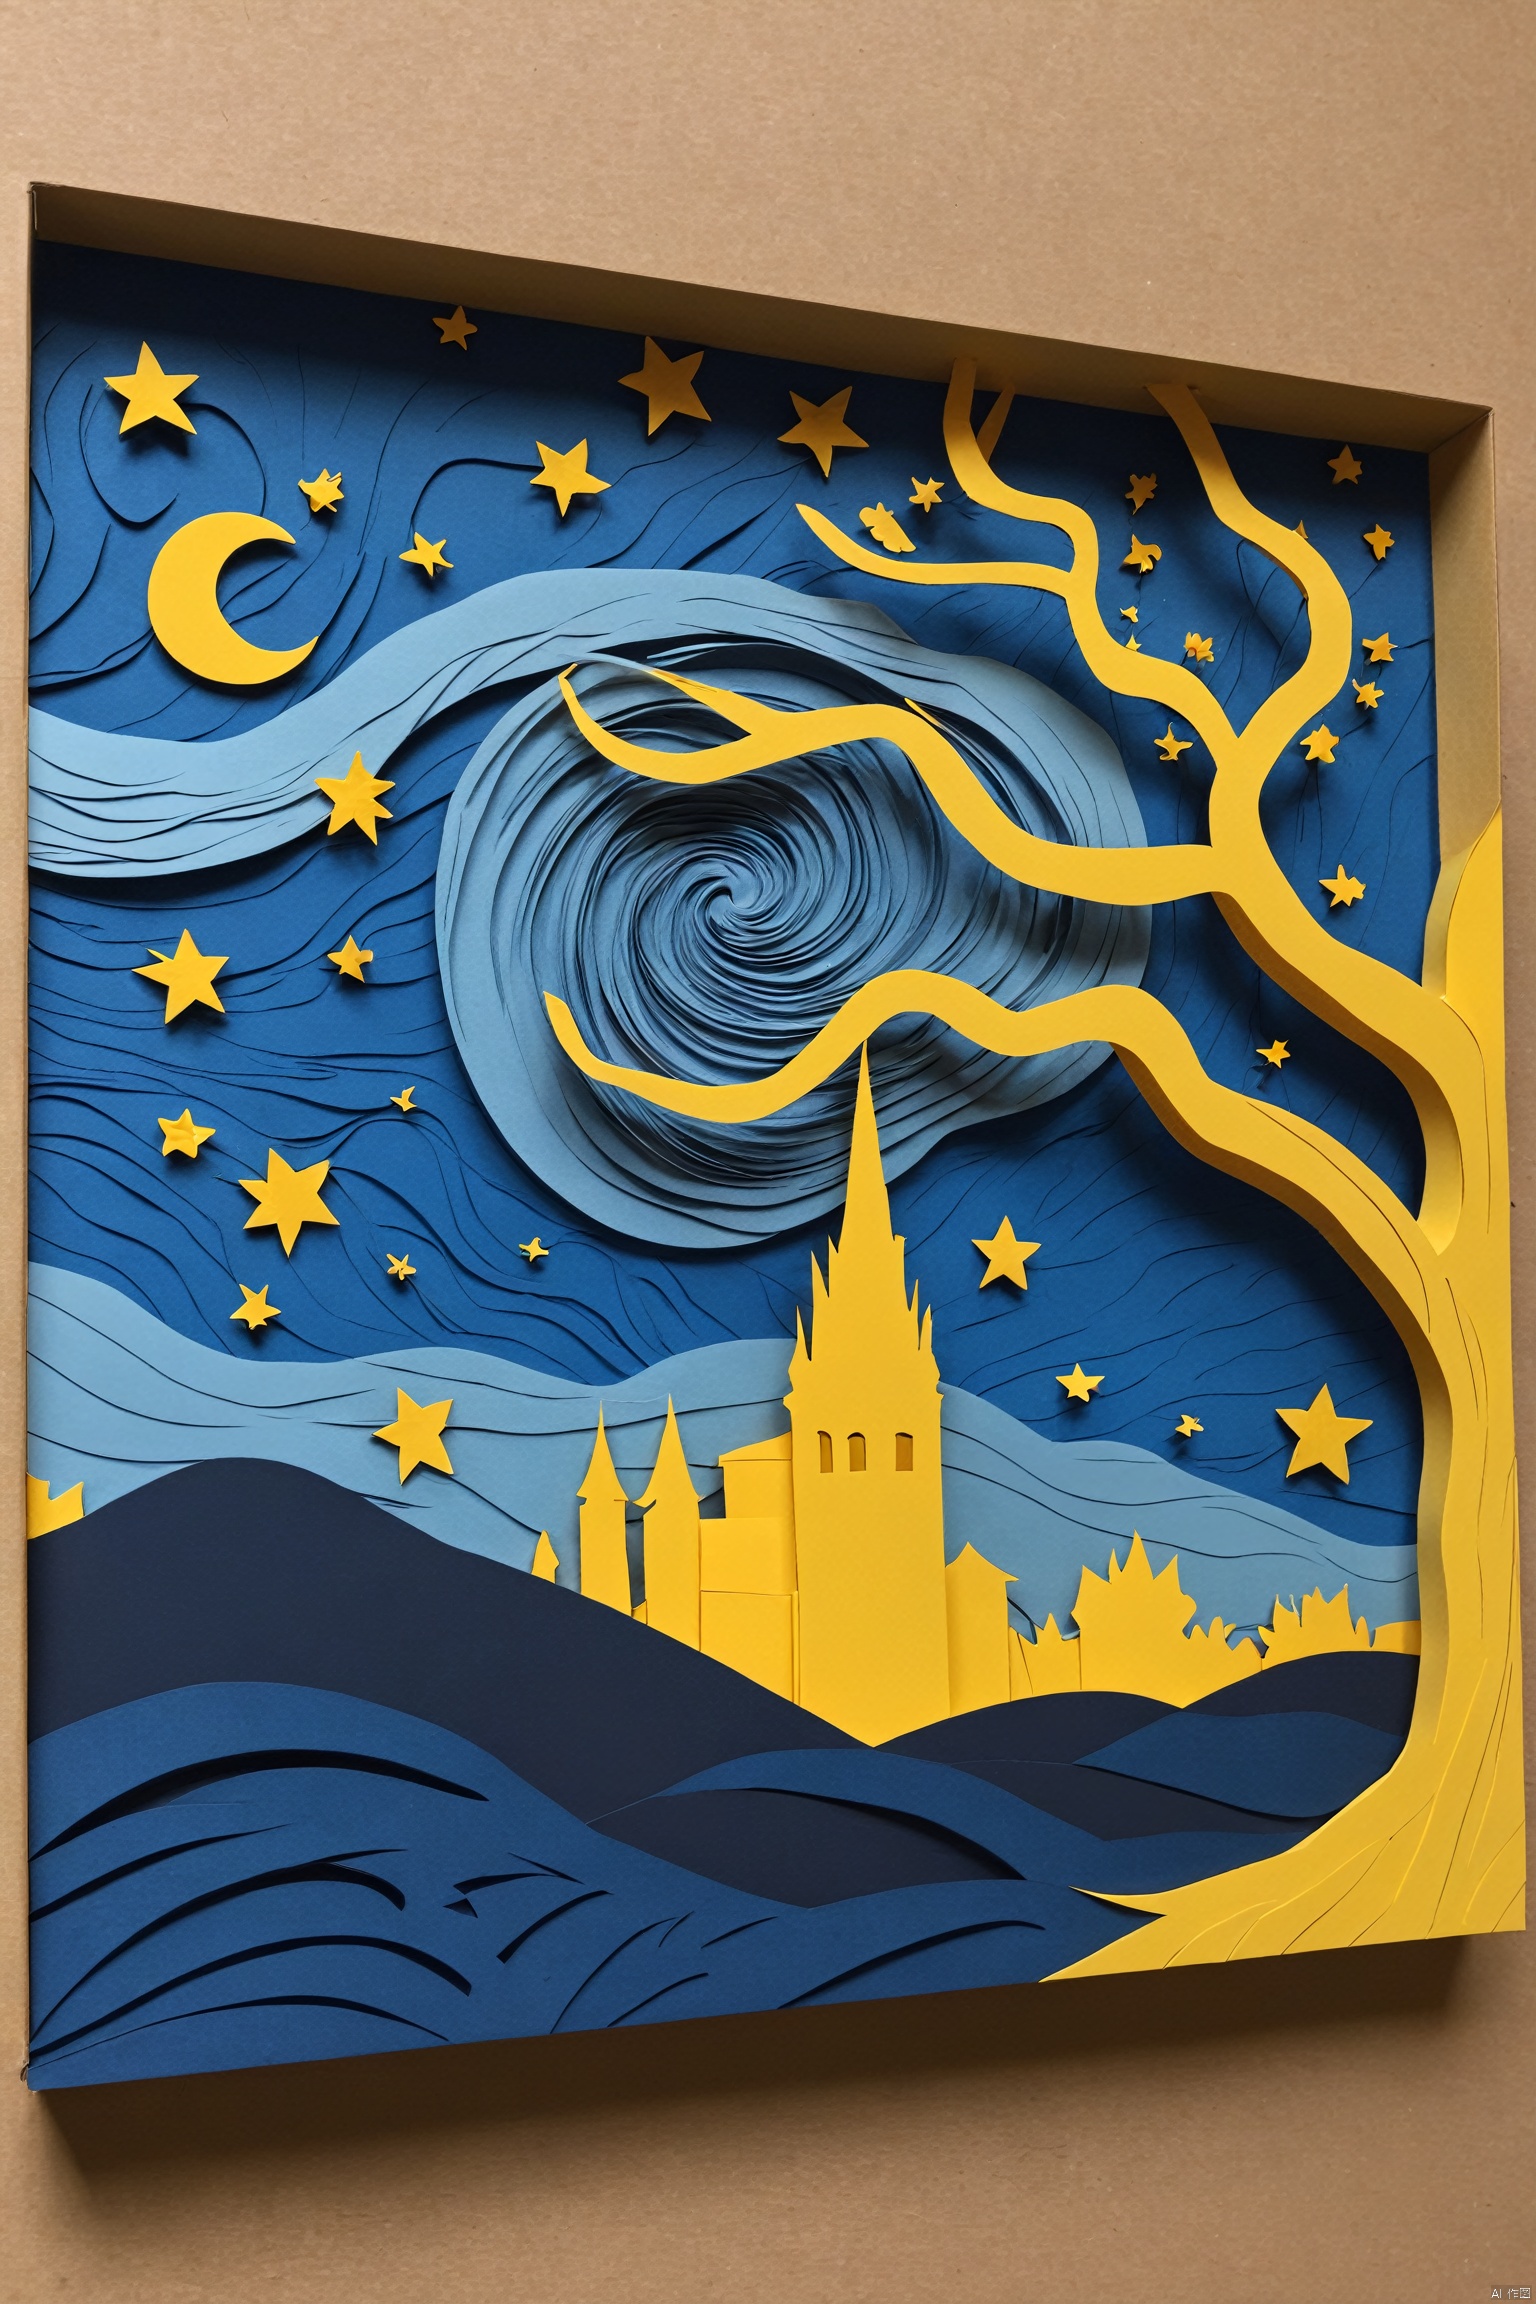 kirigami representation of the image captures the mesmerizing essence of vincent van gogh's iconic painting, "starry night." the dominant element is a majestic tree with gnarled branches and glowing yellow leaves. the swirling blues and yellows in the background represent the night sky, evoking a sense of movement and energy. this artwork embodies the impressionism art style with its focus on capturing the fleeting effects of light and color in a moment of time. . 3d, paper folding, paper cutting,intricate, symmetrical, precision, clean lines